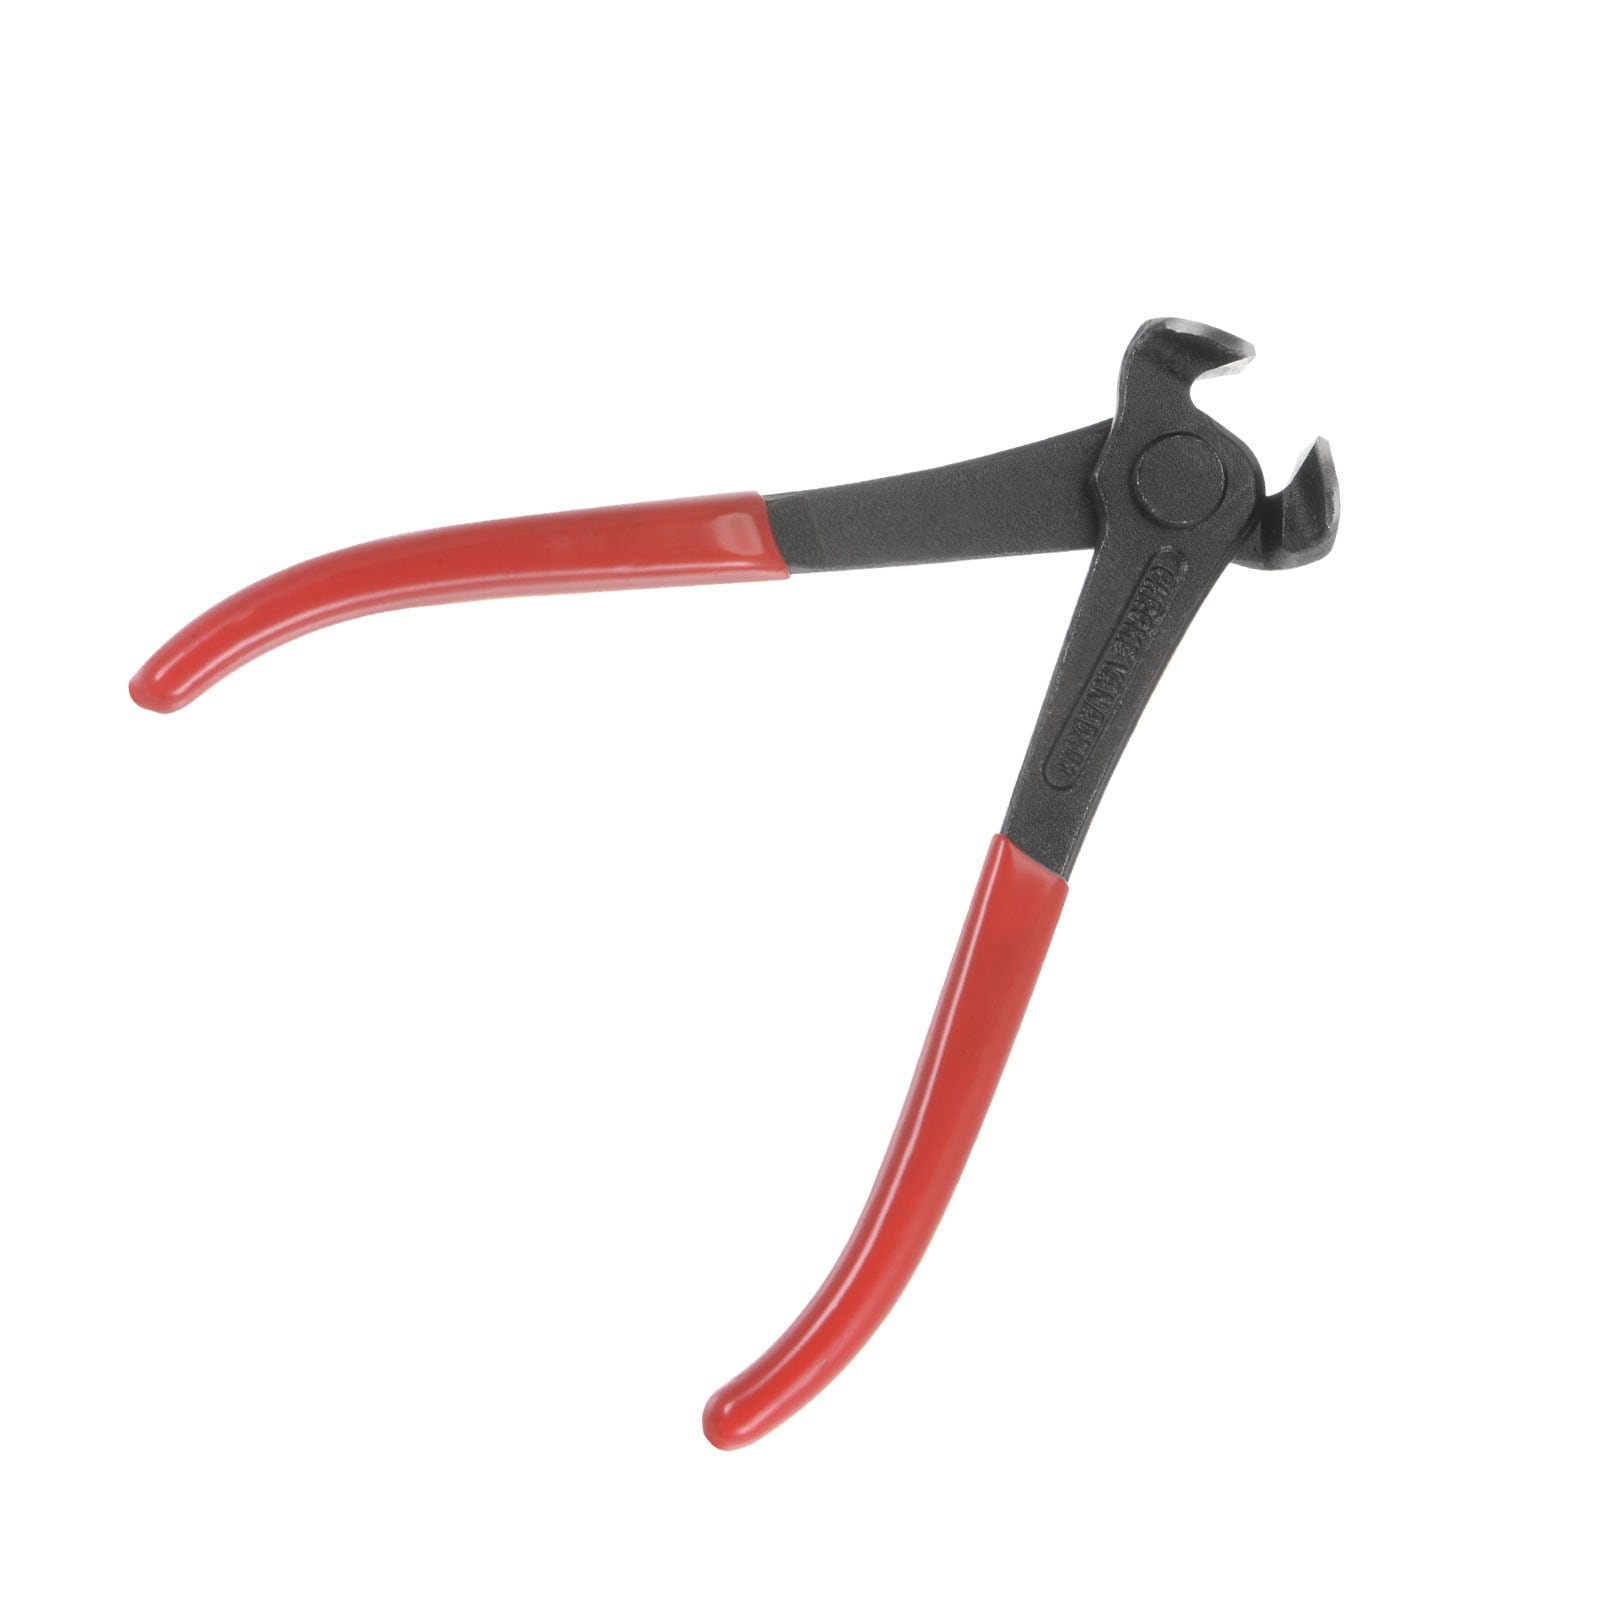 End Cutting Pliers 6 Nail Nippers Puller Plier with PVC Handle - Black Red  - 6 Inch - Yahoo Shopping